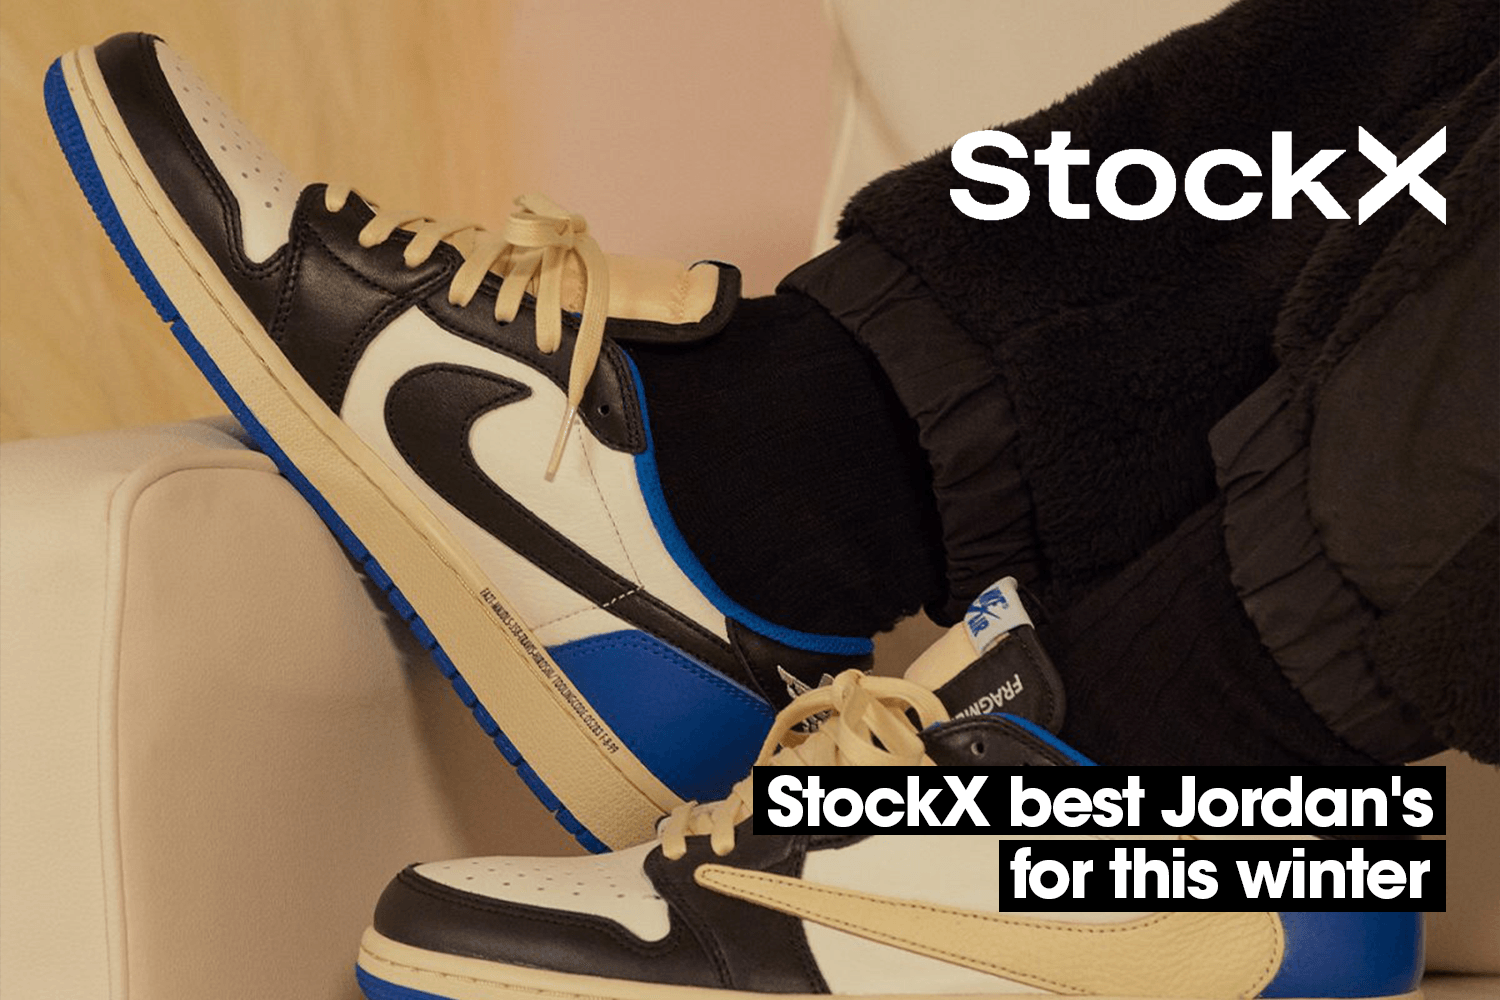 These are StockX best Jordan's for this winter